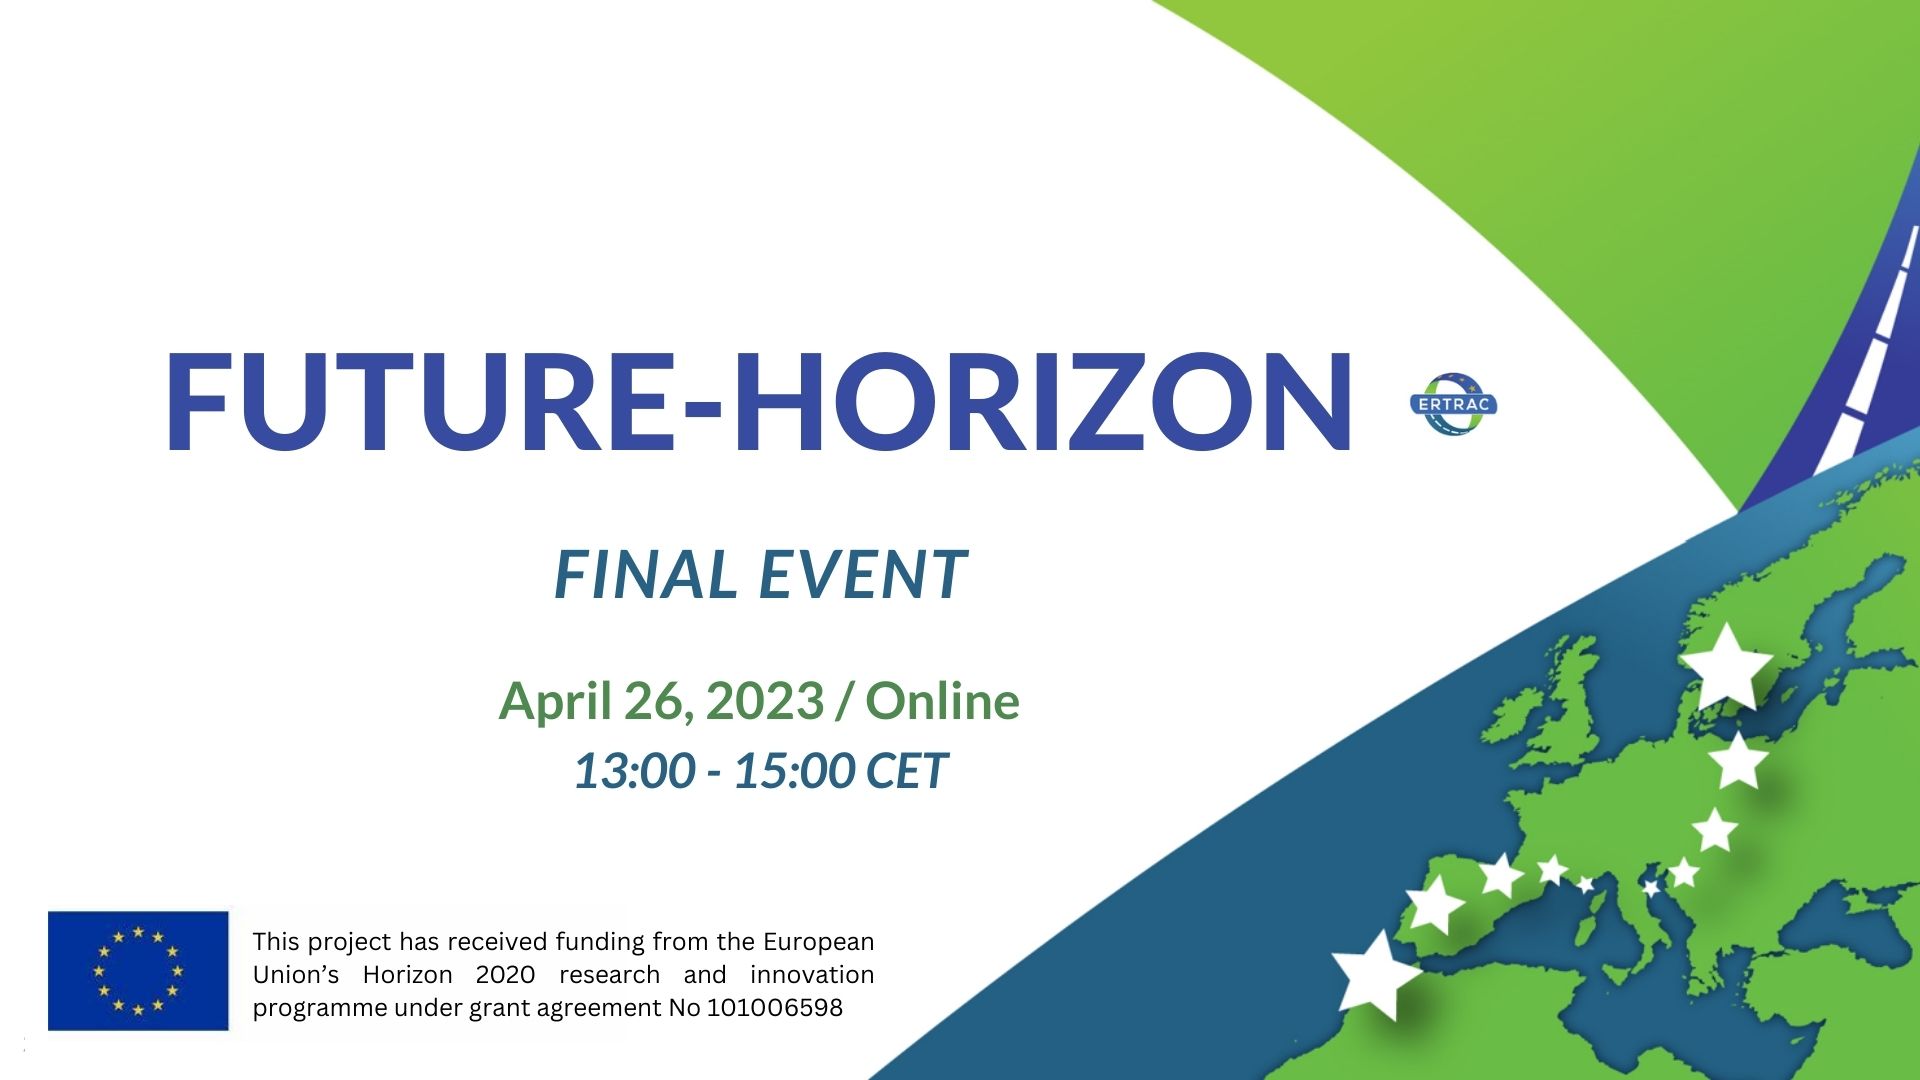 Join FUTURE-HORIZON online for final event: 26/04